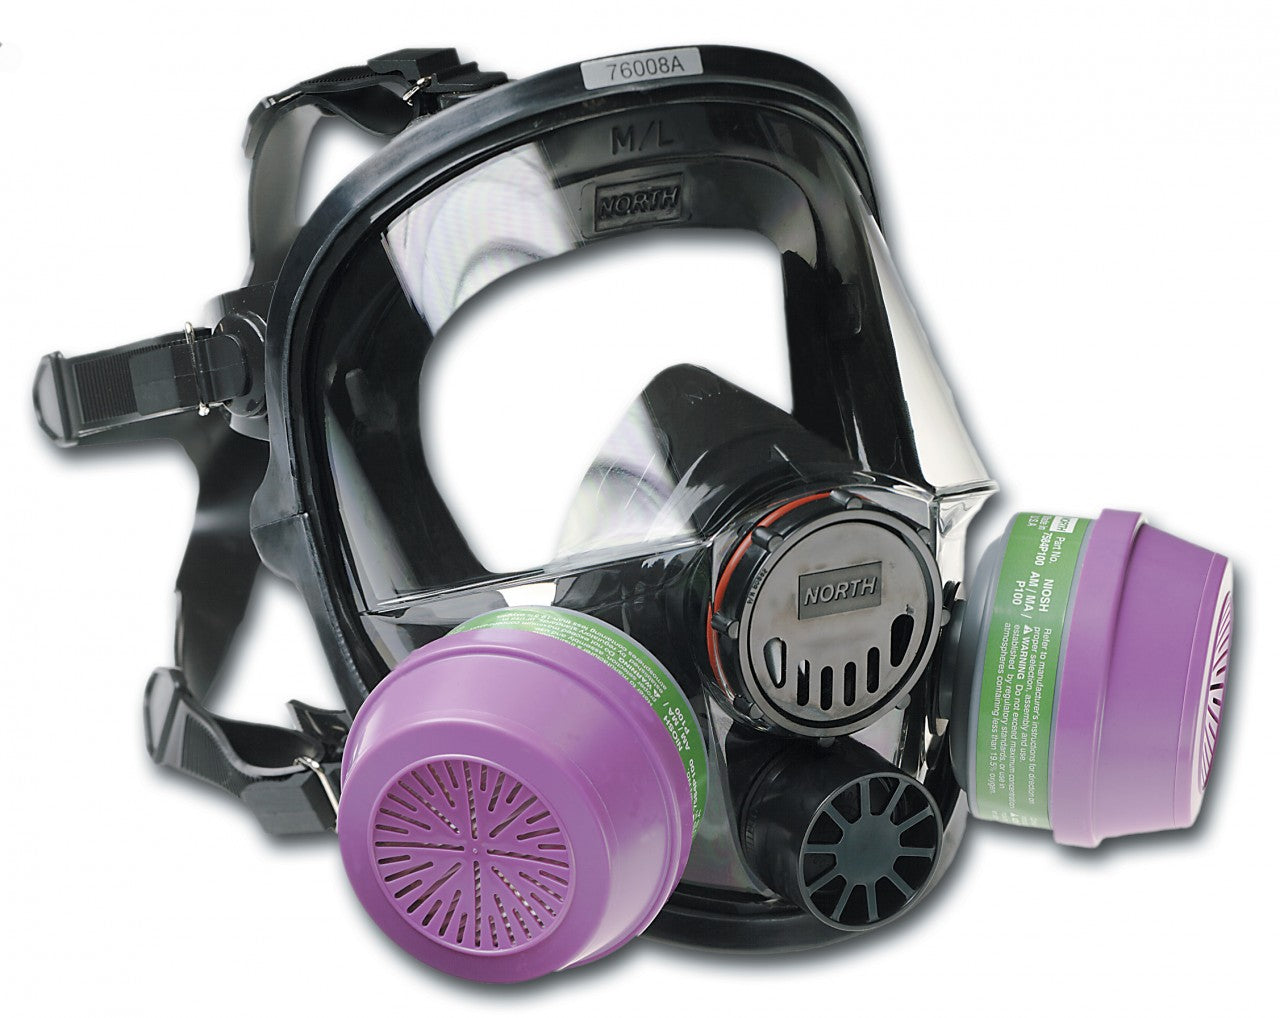 Respirator Training Safety Video Package